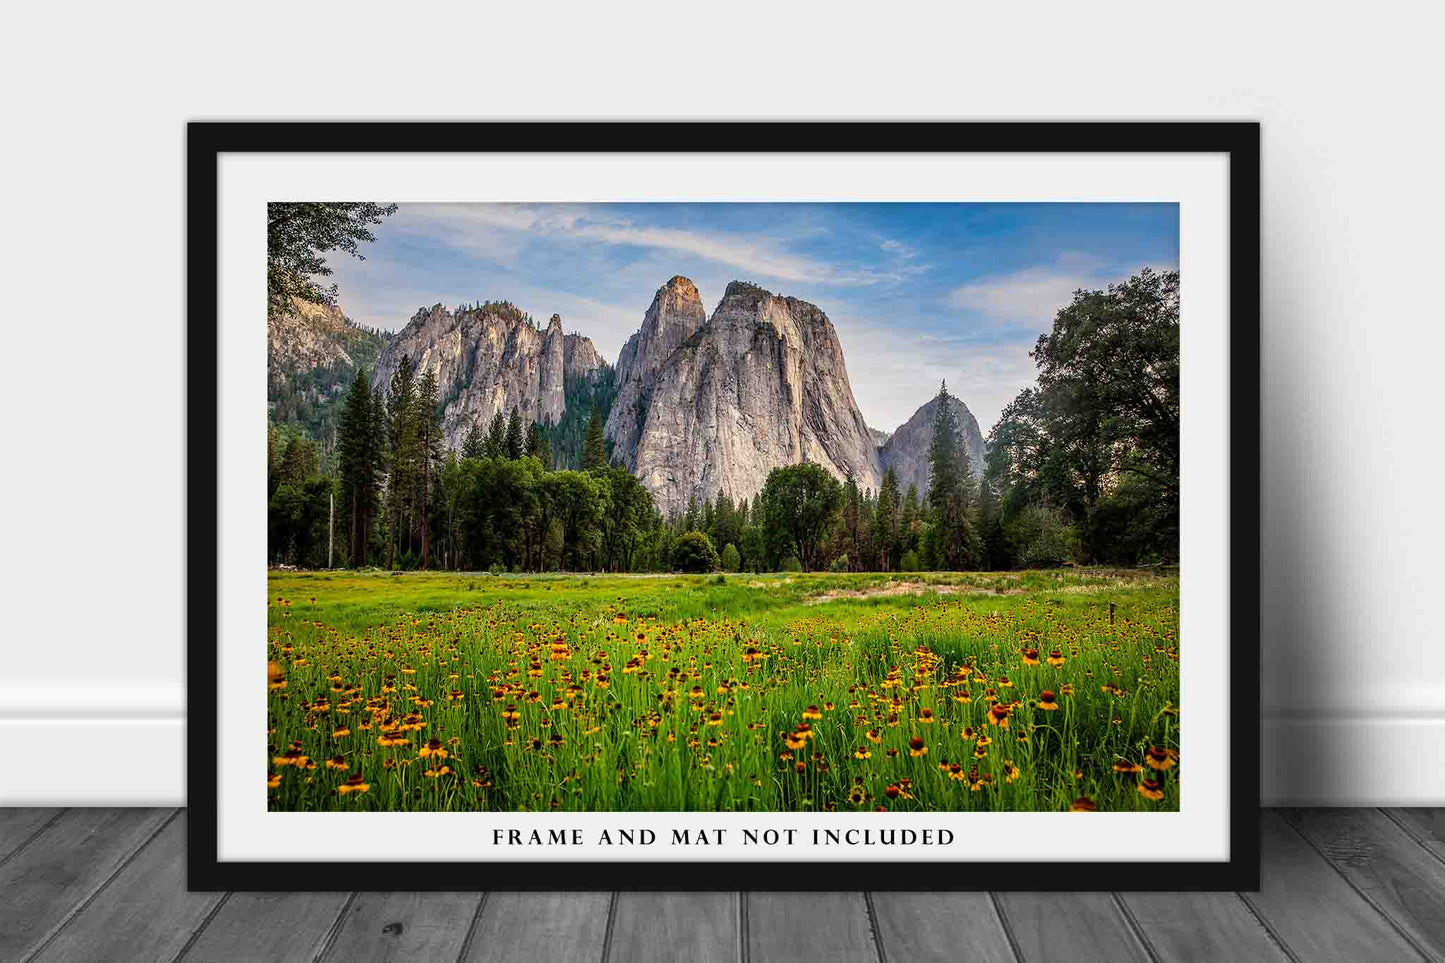 Western Landscape Photography Print - Picture of Wildflowers at Cathedral Rocks in Yosemite National Park California Nature Wall Art Decor